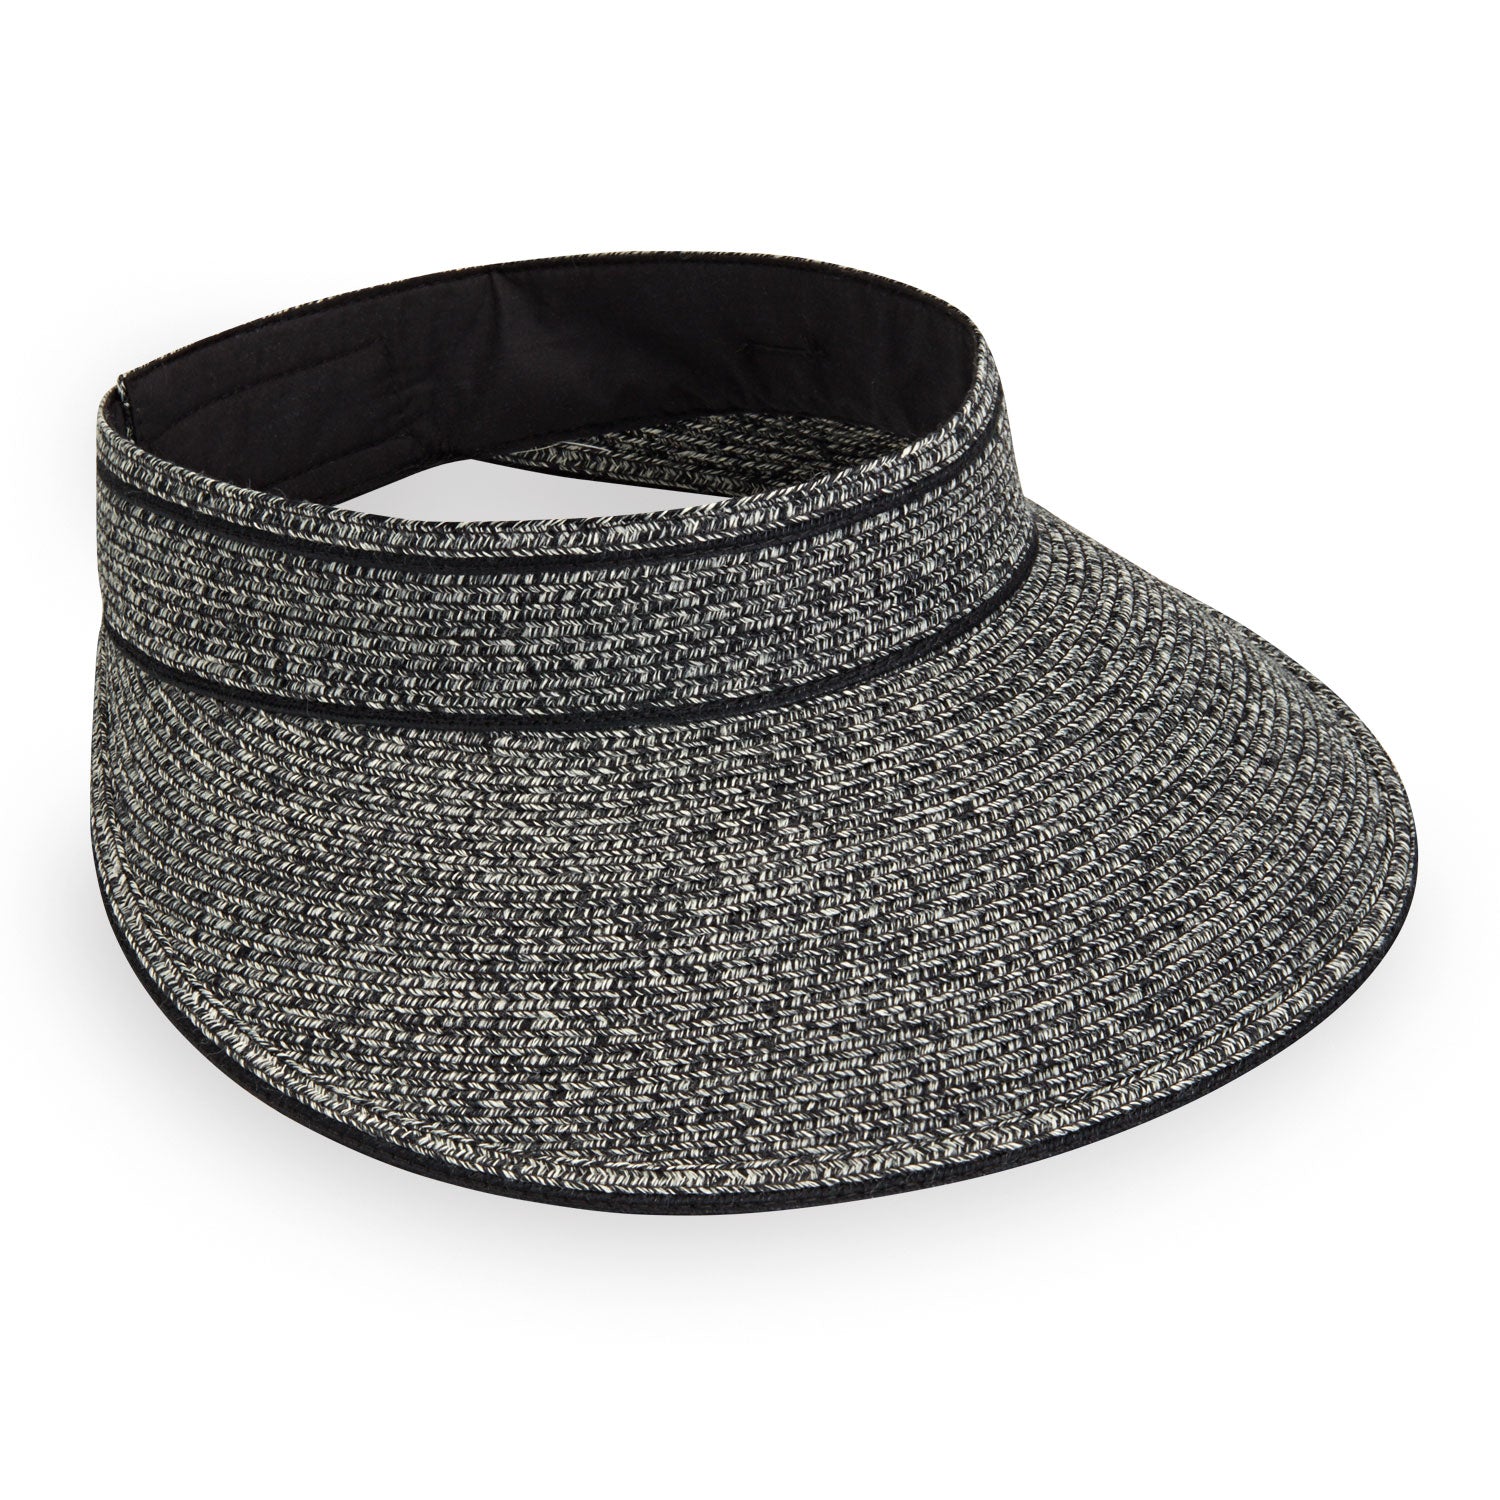 Featuring Front of Lily Polyester Sun Protection Visor in Black from Carkella by Wallaroo